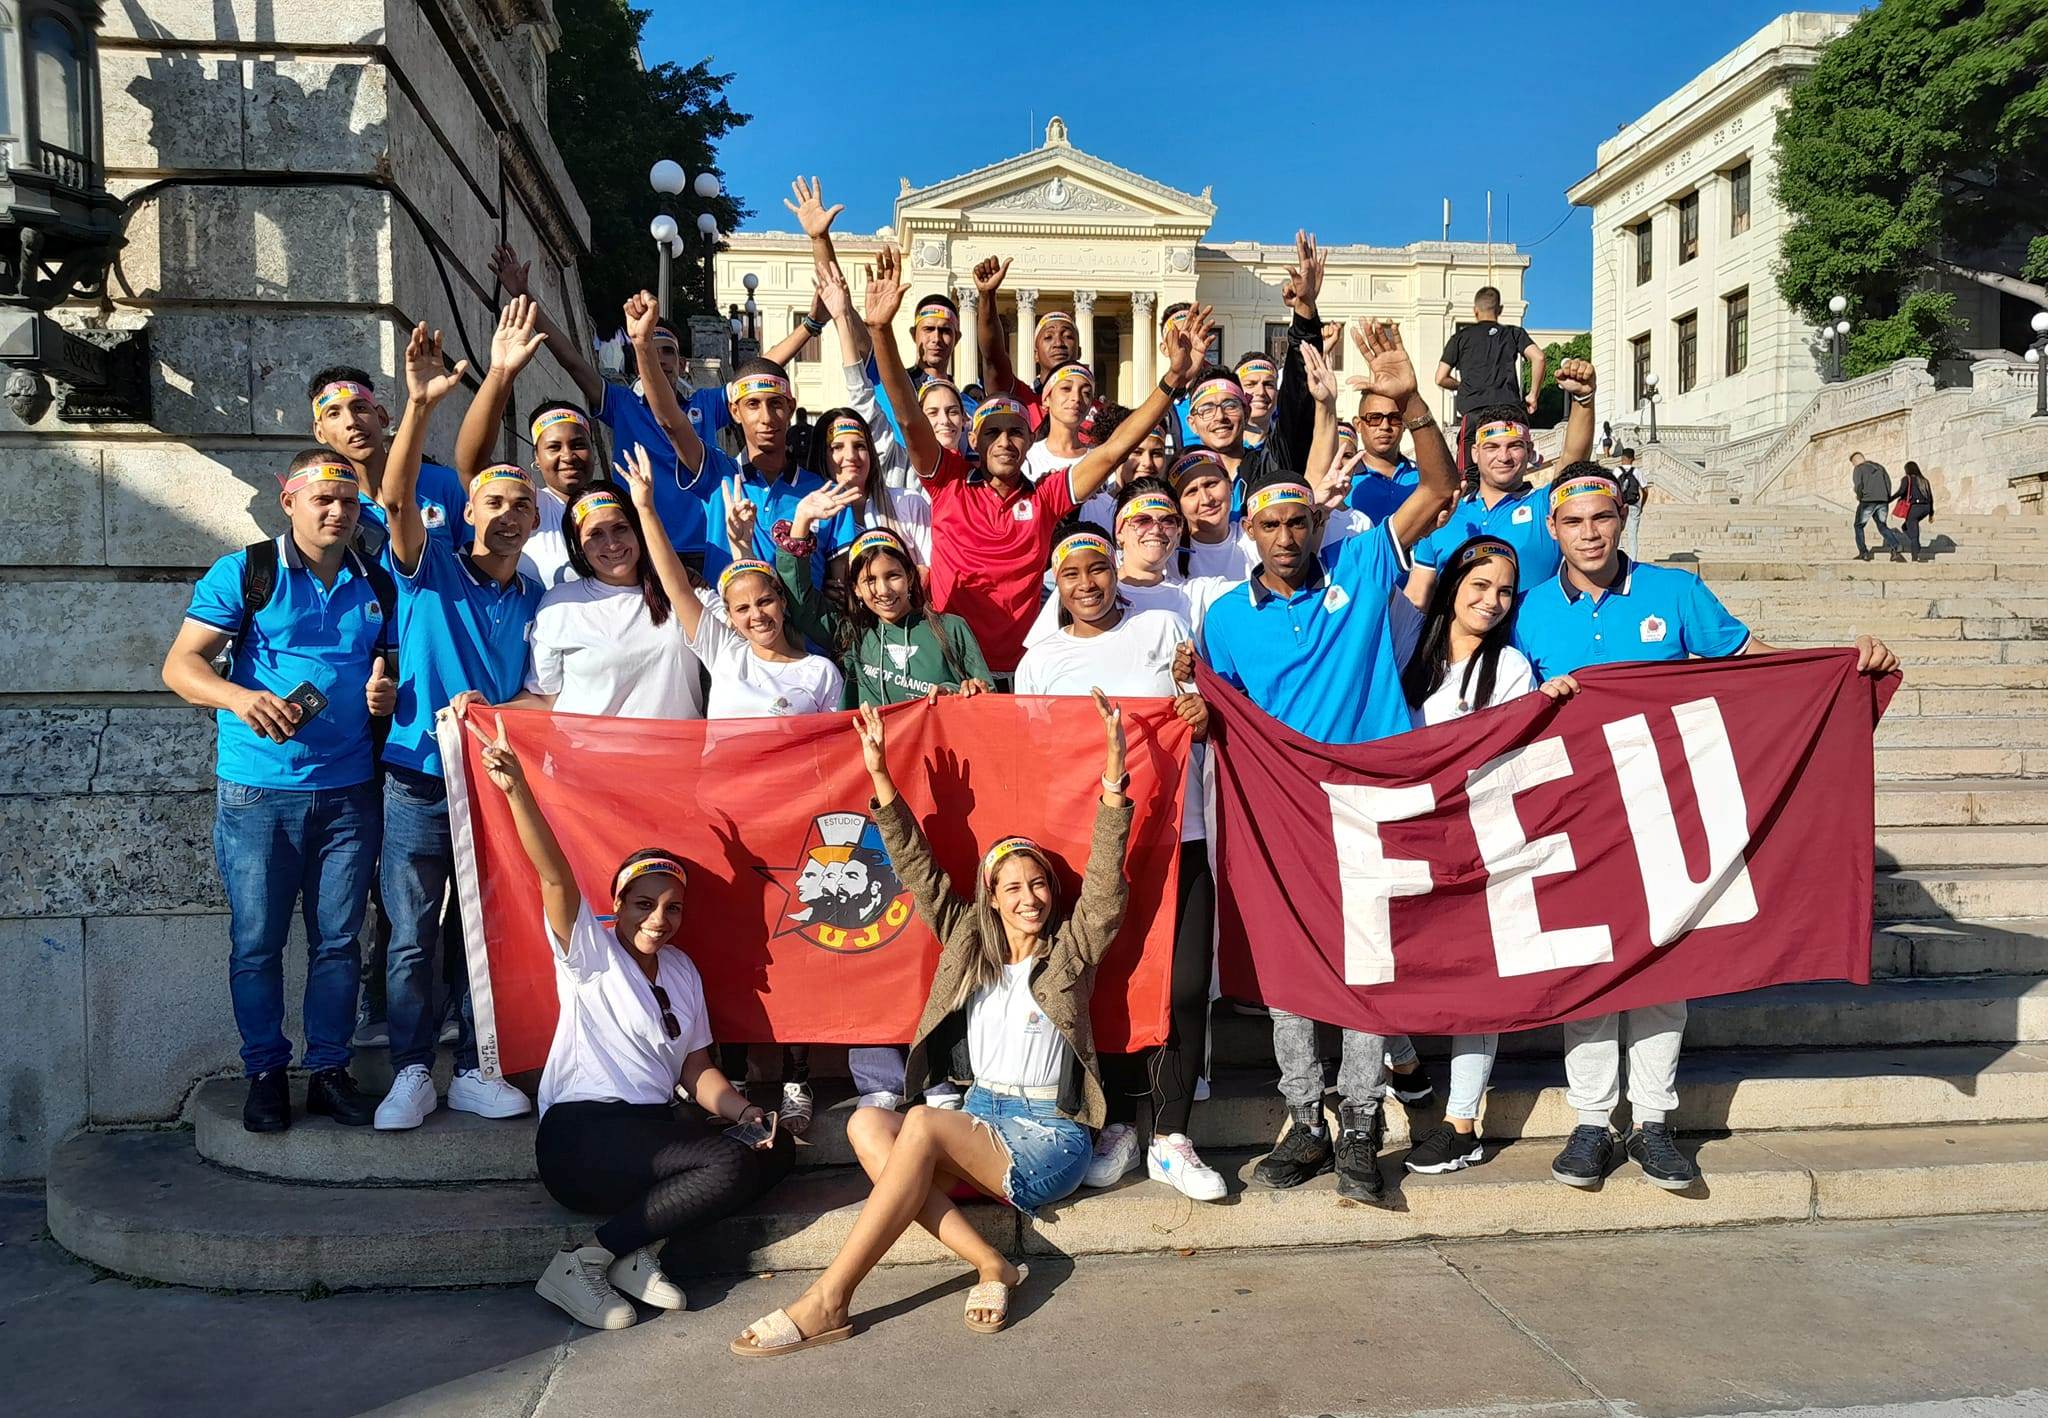  In Havana delegates from Camagüey to the communist youth congress